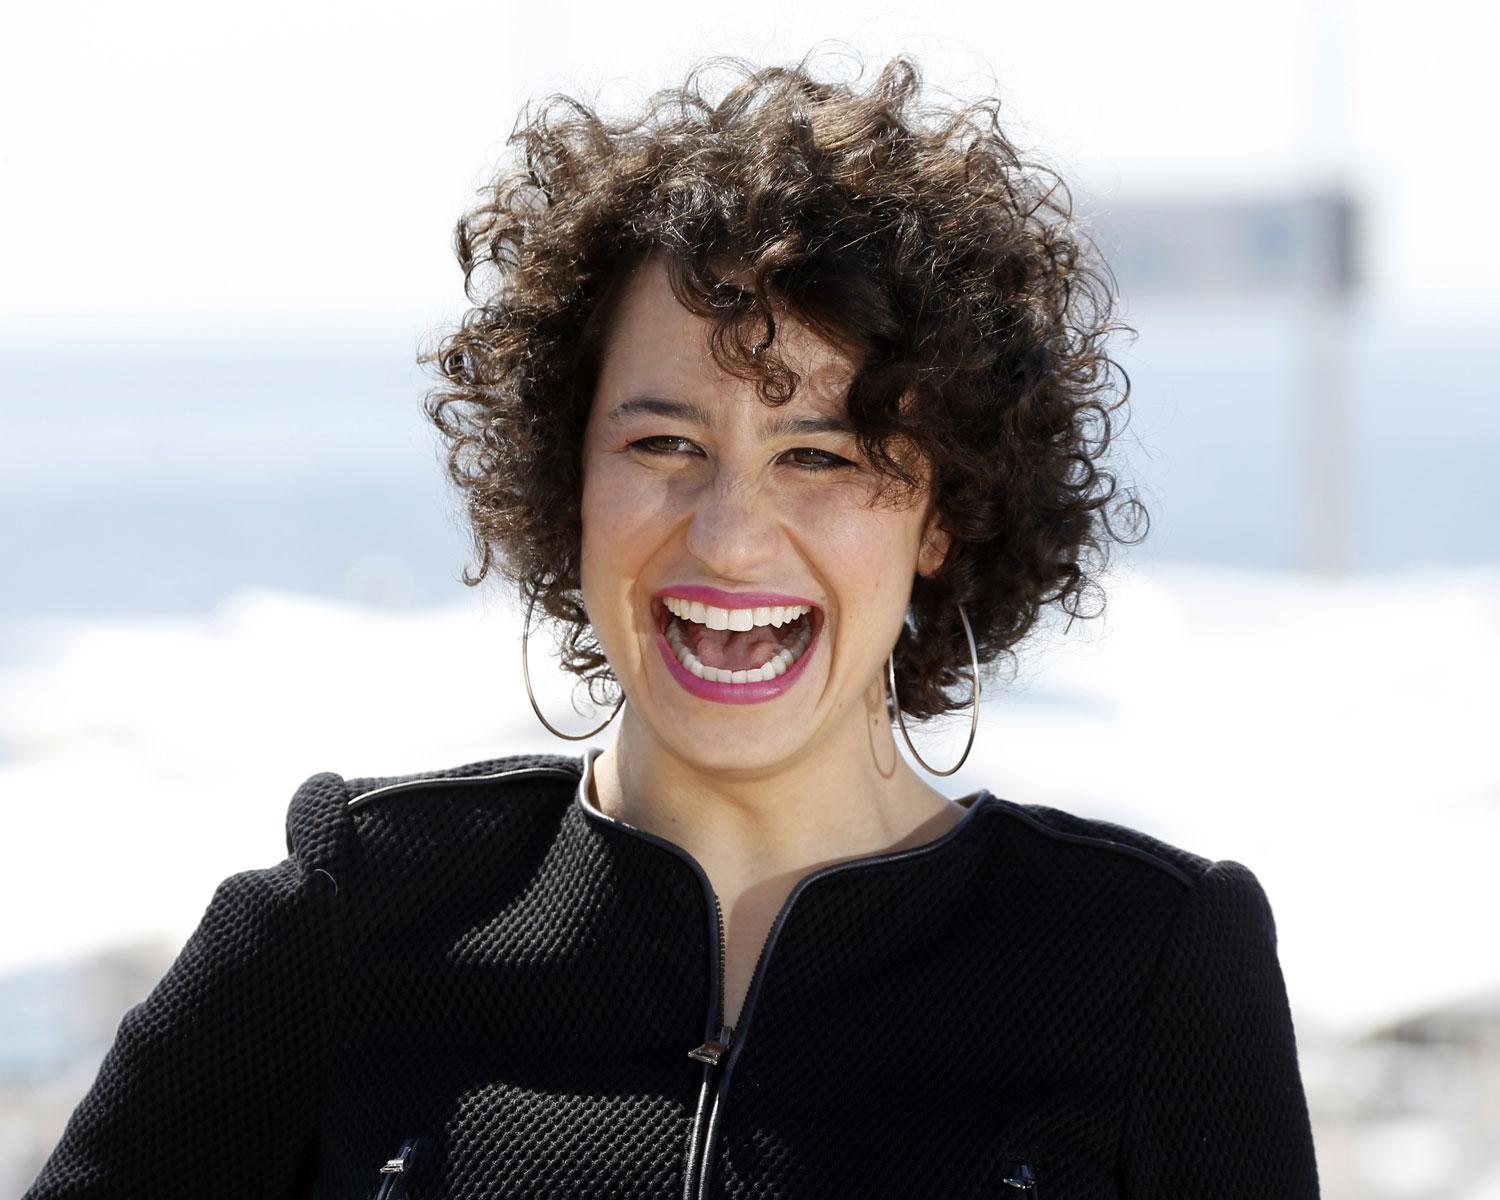 75+ Hot Pictures Of Ilana Glazer Which Are Going To Make You Want Her Badly | Best Of Comic Books